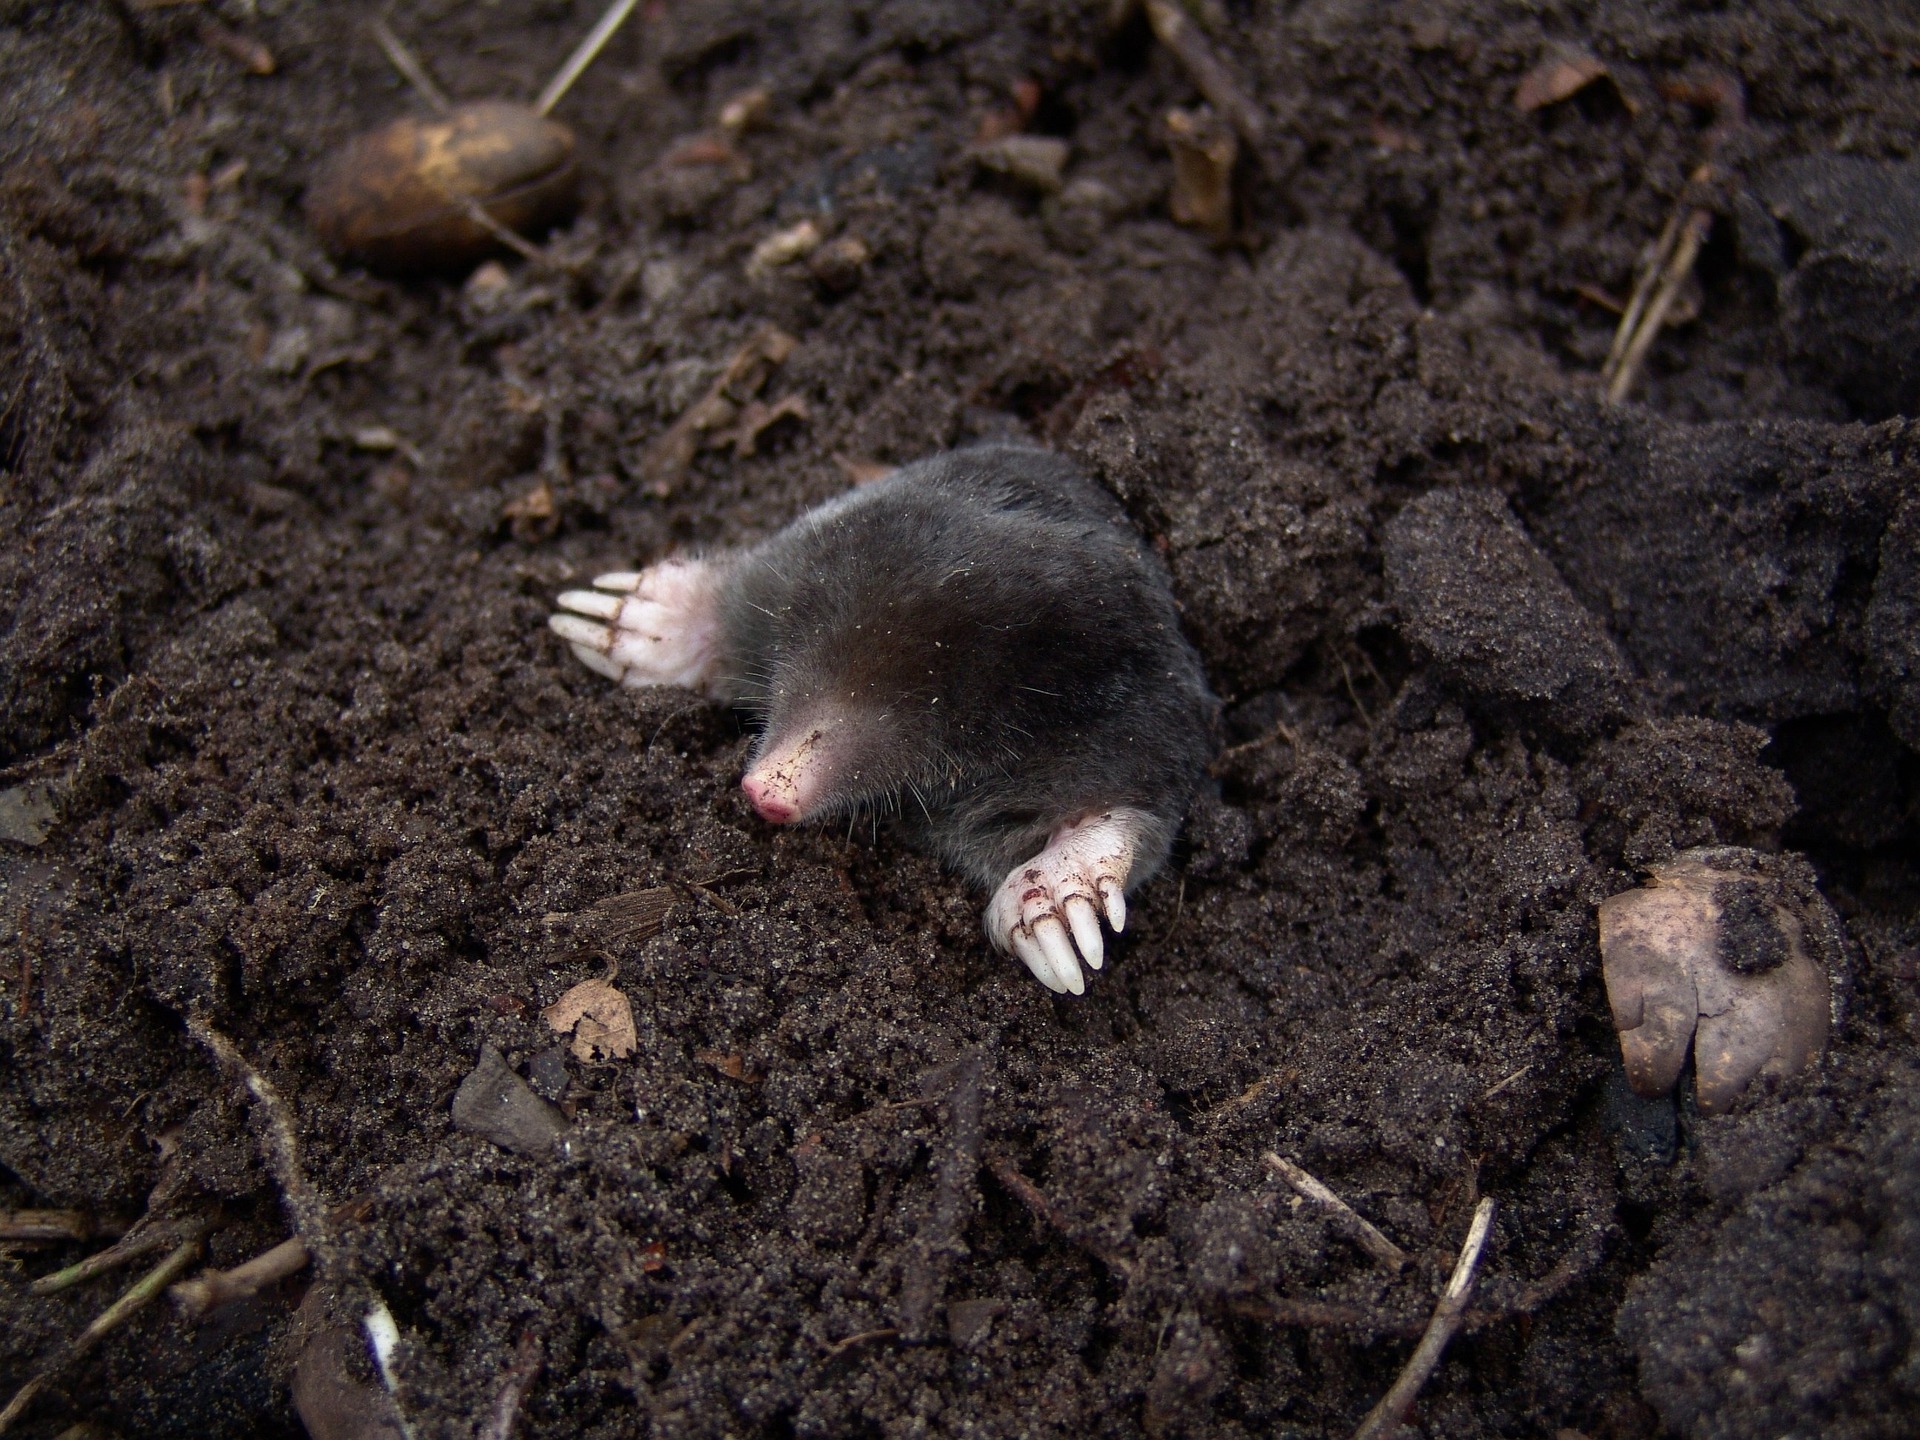 mole emerging from hole